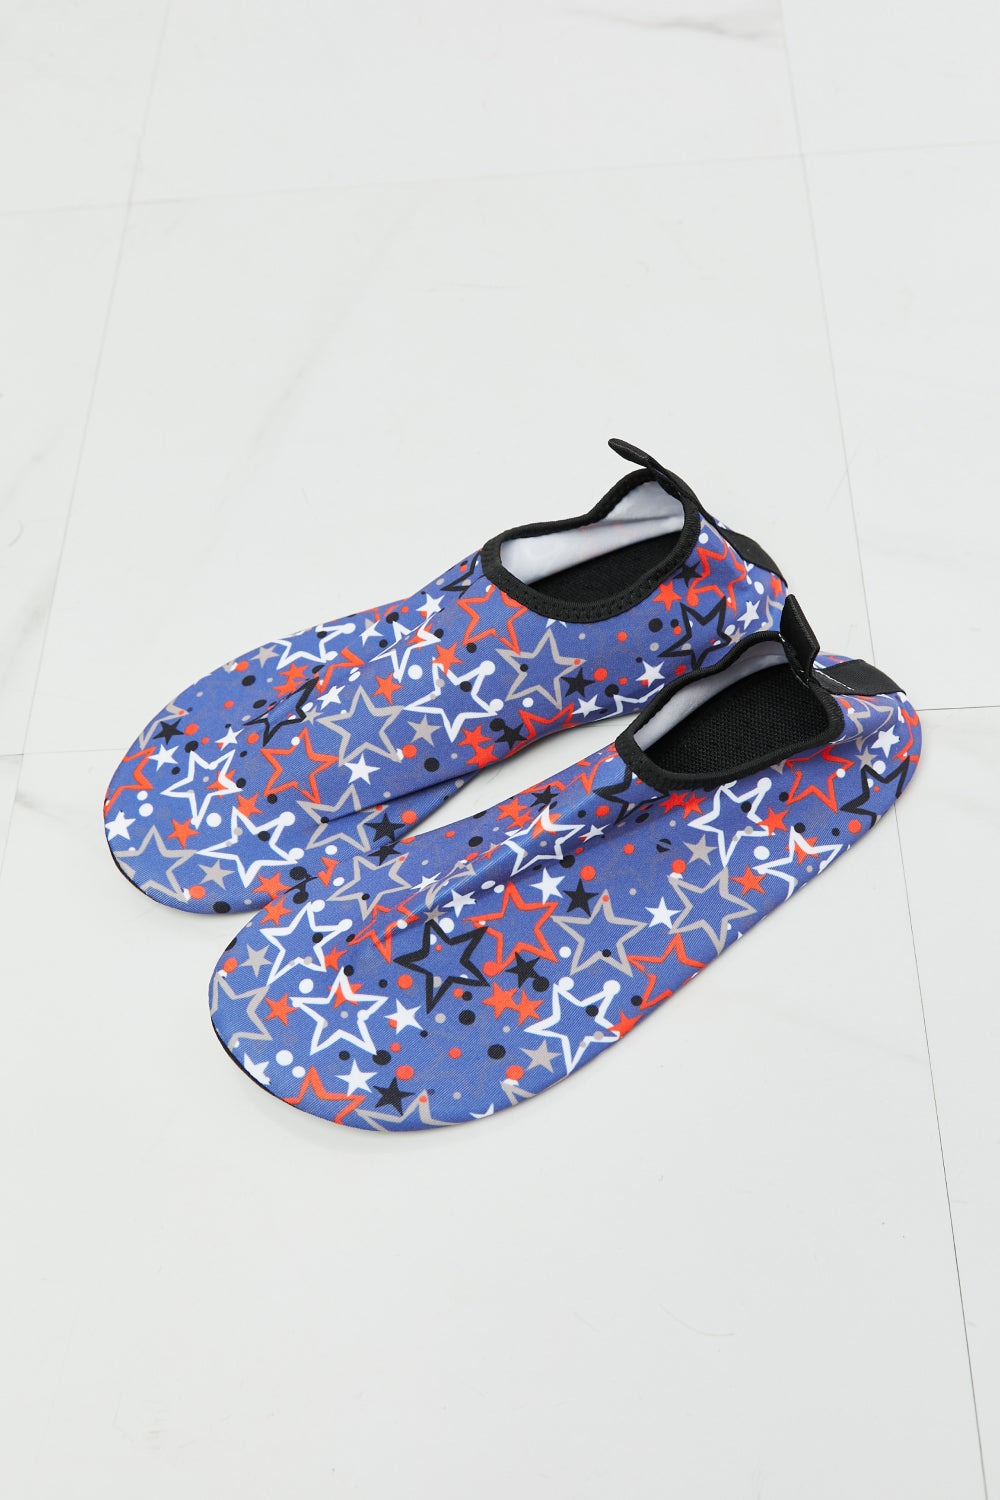 MMshoes On The Shore Water Shoes in Navy Print on any thing USA/STOD clothes